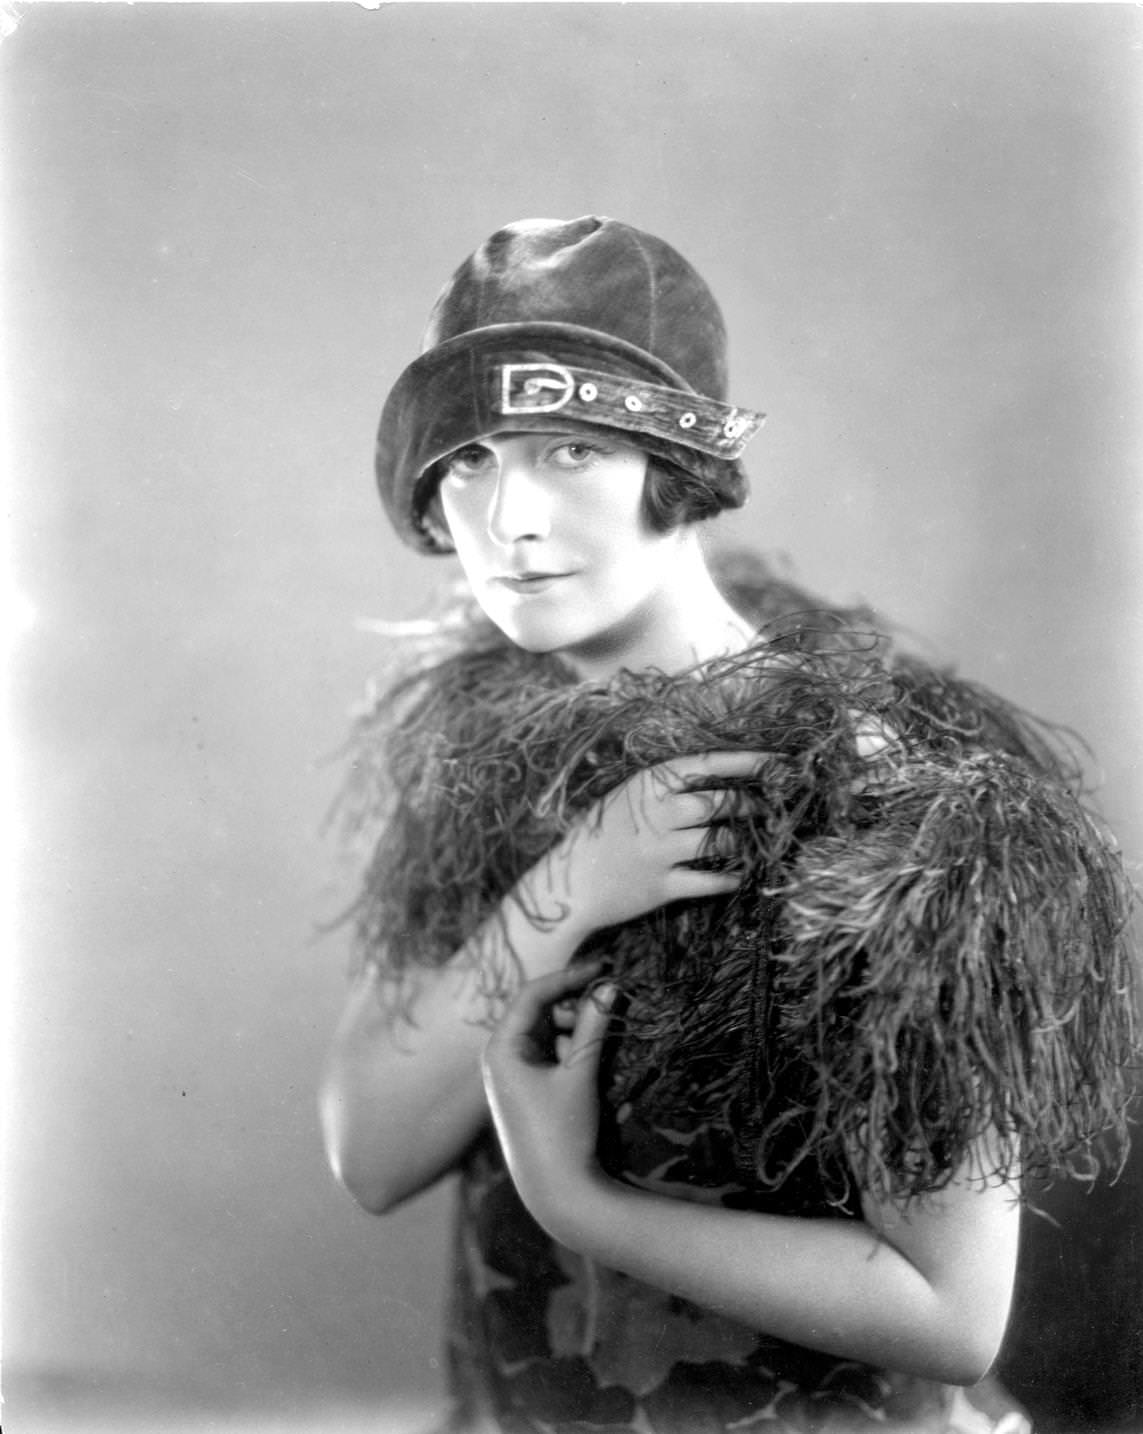 British actress, Agnes Glynn wearing an ornamental cloche hat and a boa, 1925